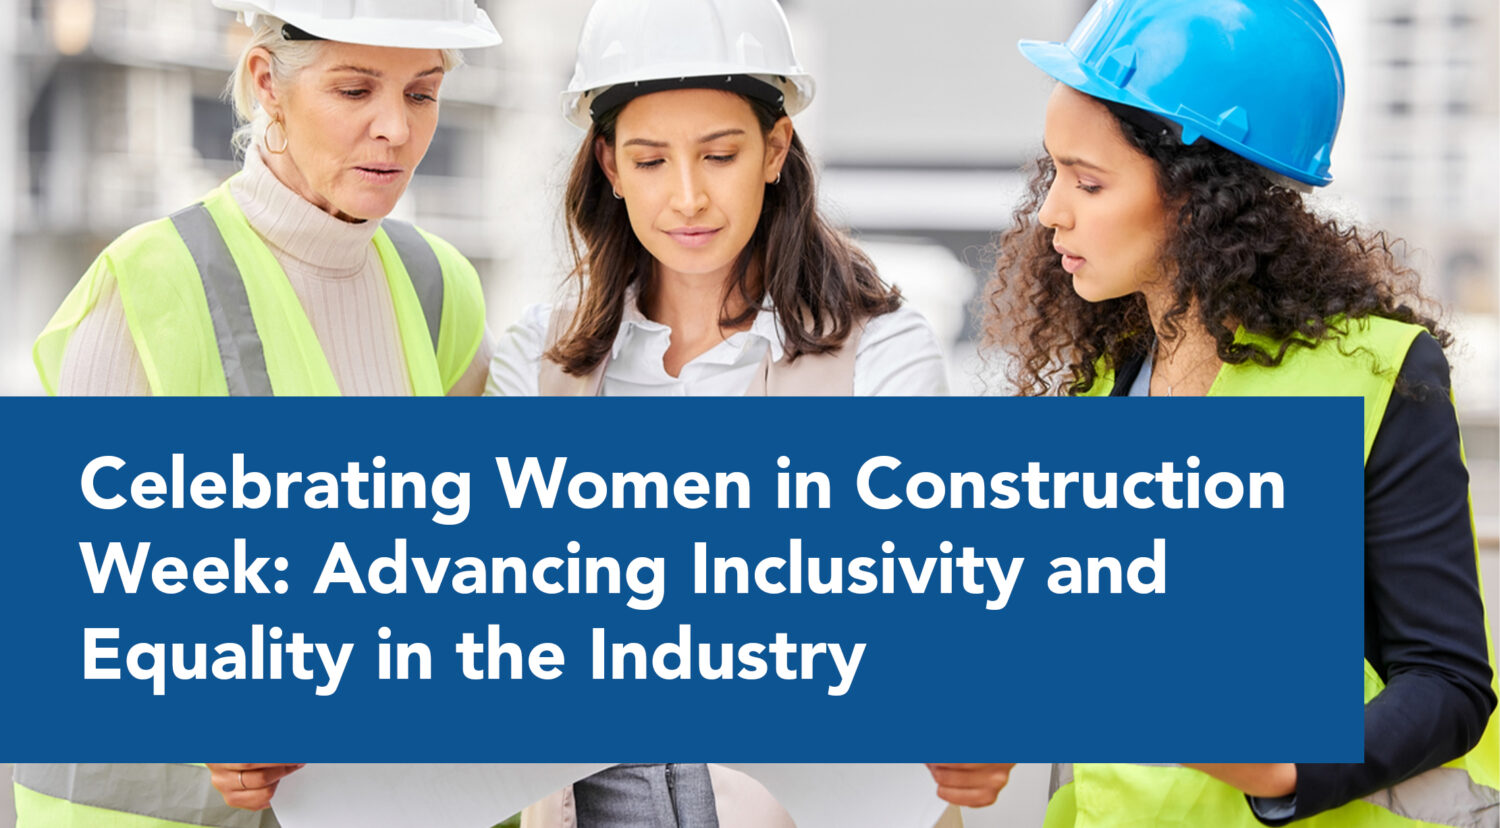 Celebrating Women in Construction Week: Advancing Inclusivity and Equality in the Industry